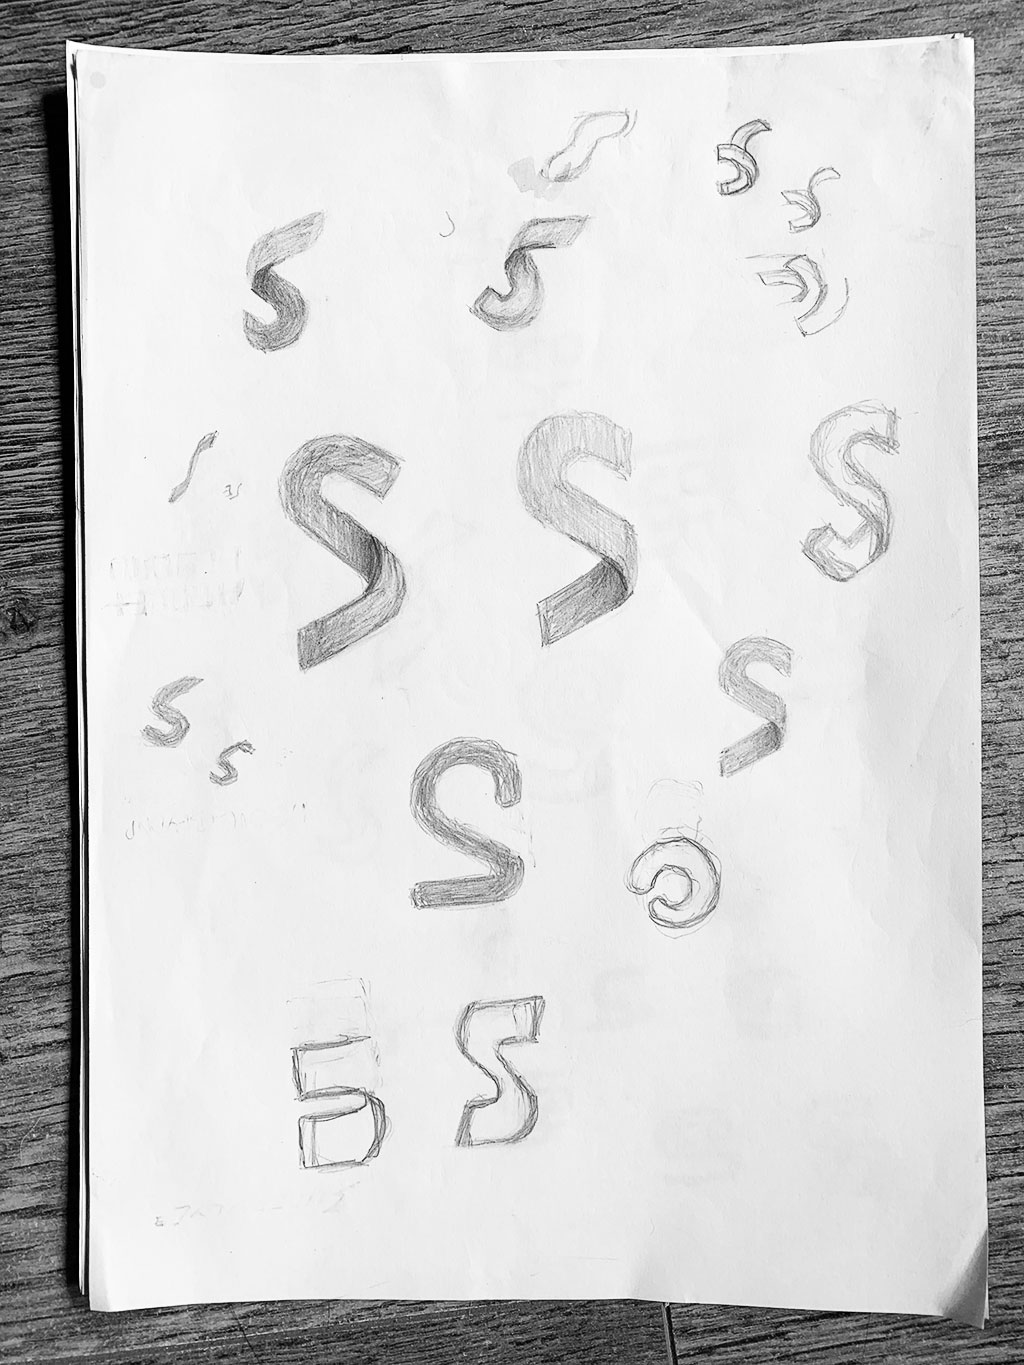 Logo Design Sketches for Initial S Letter S SuperblyCo